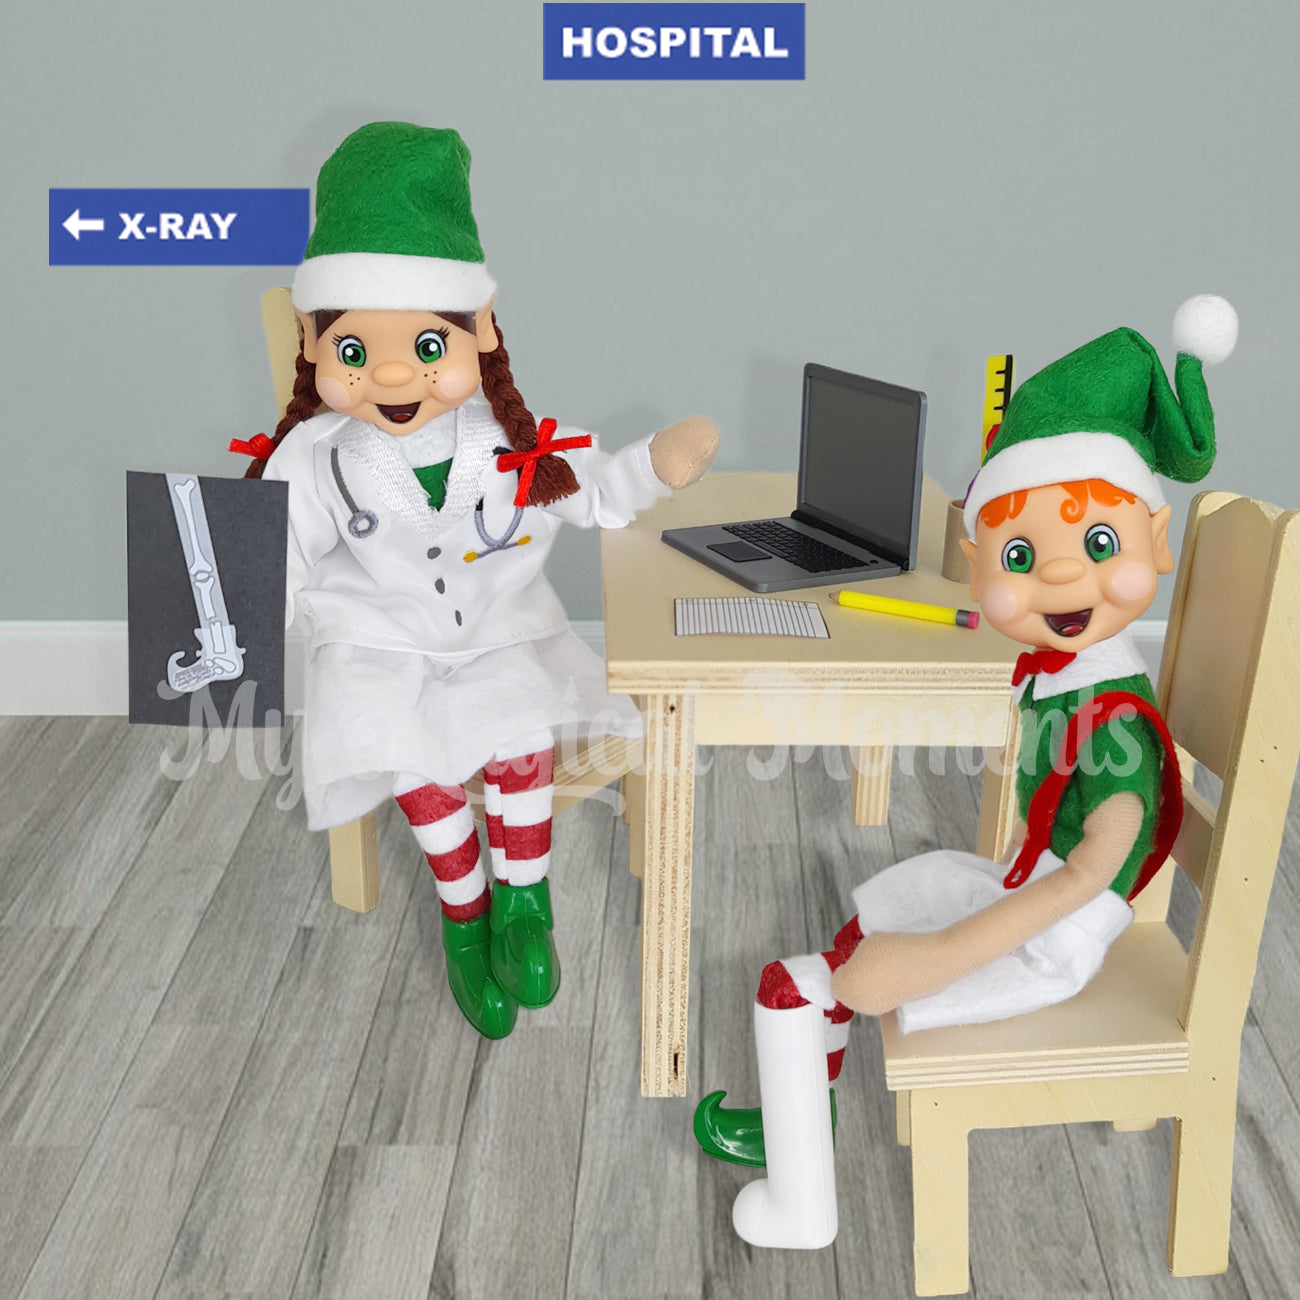 A brown hair girl elf dressed as a doctor holding a broken leg x-ray. There is a orange hair elf with a broken foot in a leg cast prop